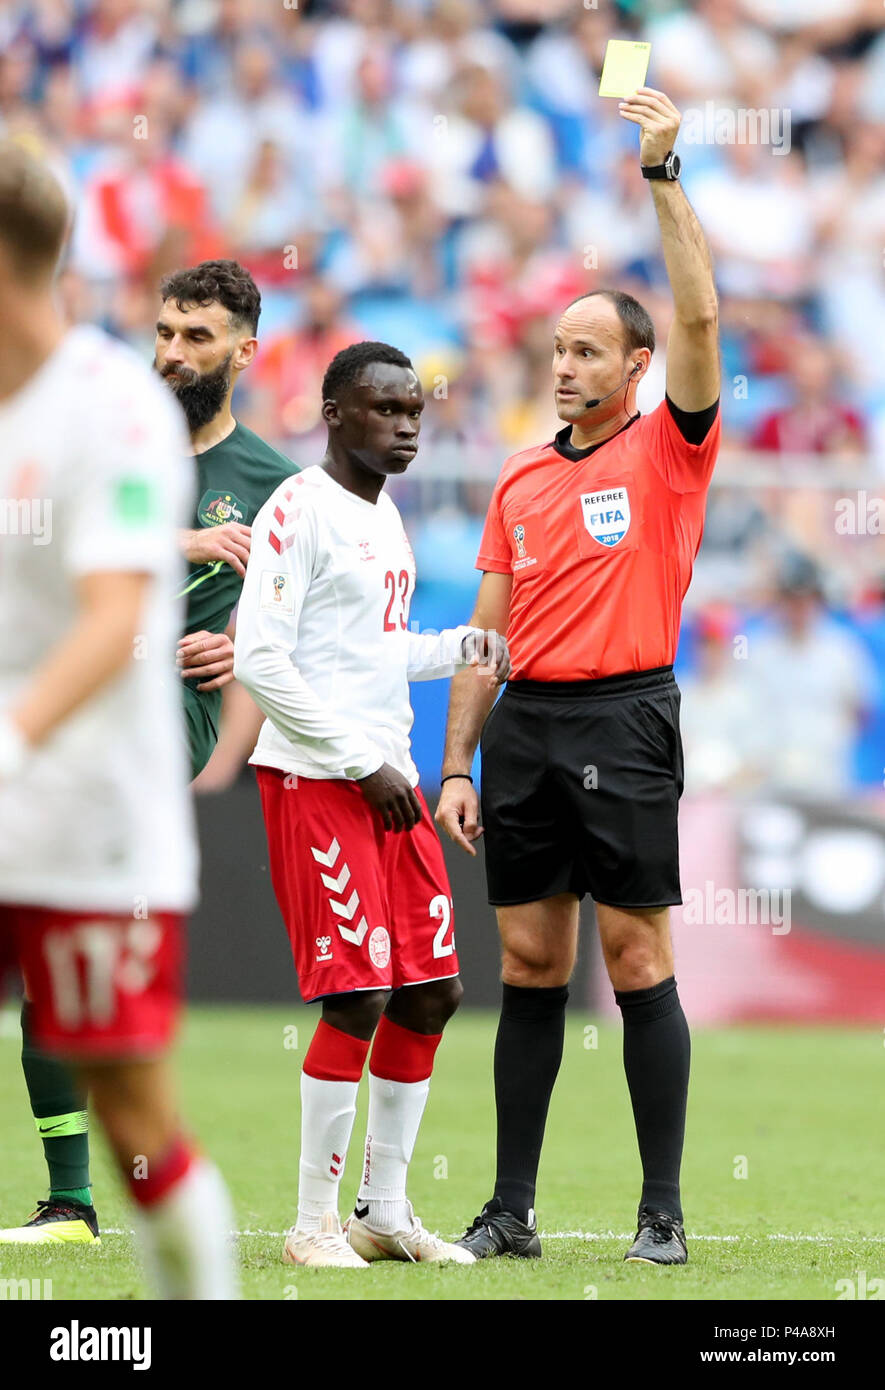 Samara, Russia. 21st June, 2018. The referee gives a yellow card to Pione Sisto (2nd R) of Denmark during the 2018 FIFA World Cup Group C match between Denmark and Australia in Samara, Russia, June 21, 2018. Credit: Ye Pingfan/Xinhua/Alamy Live News Stock Photo